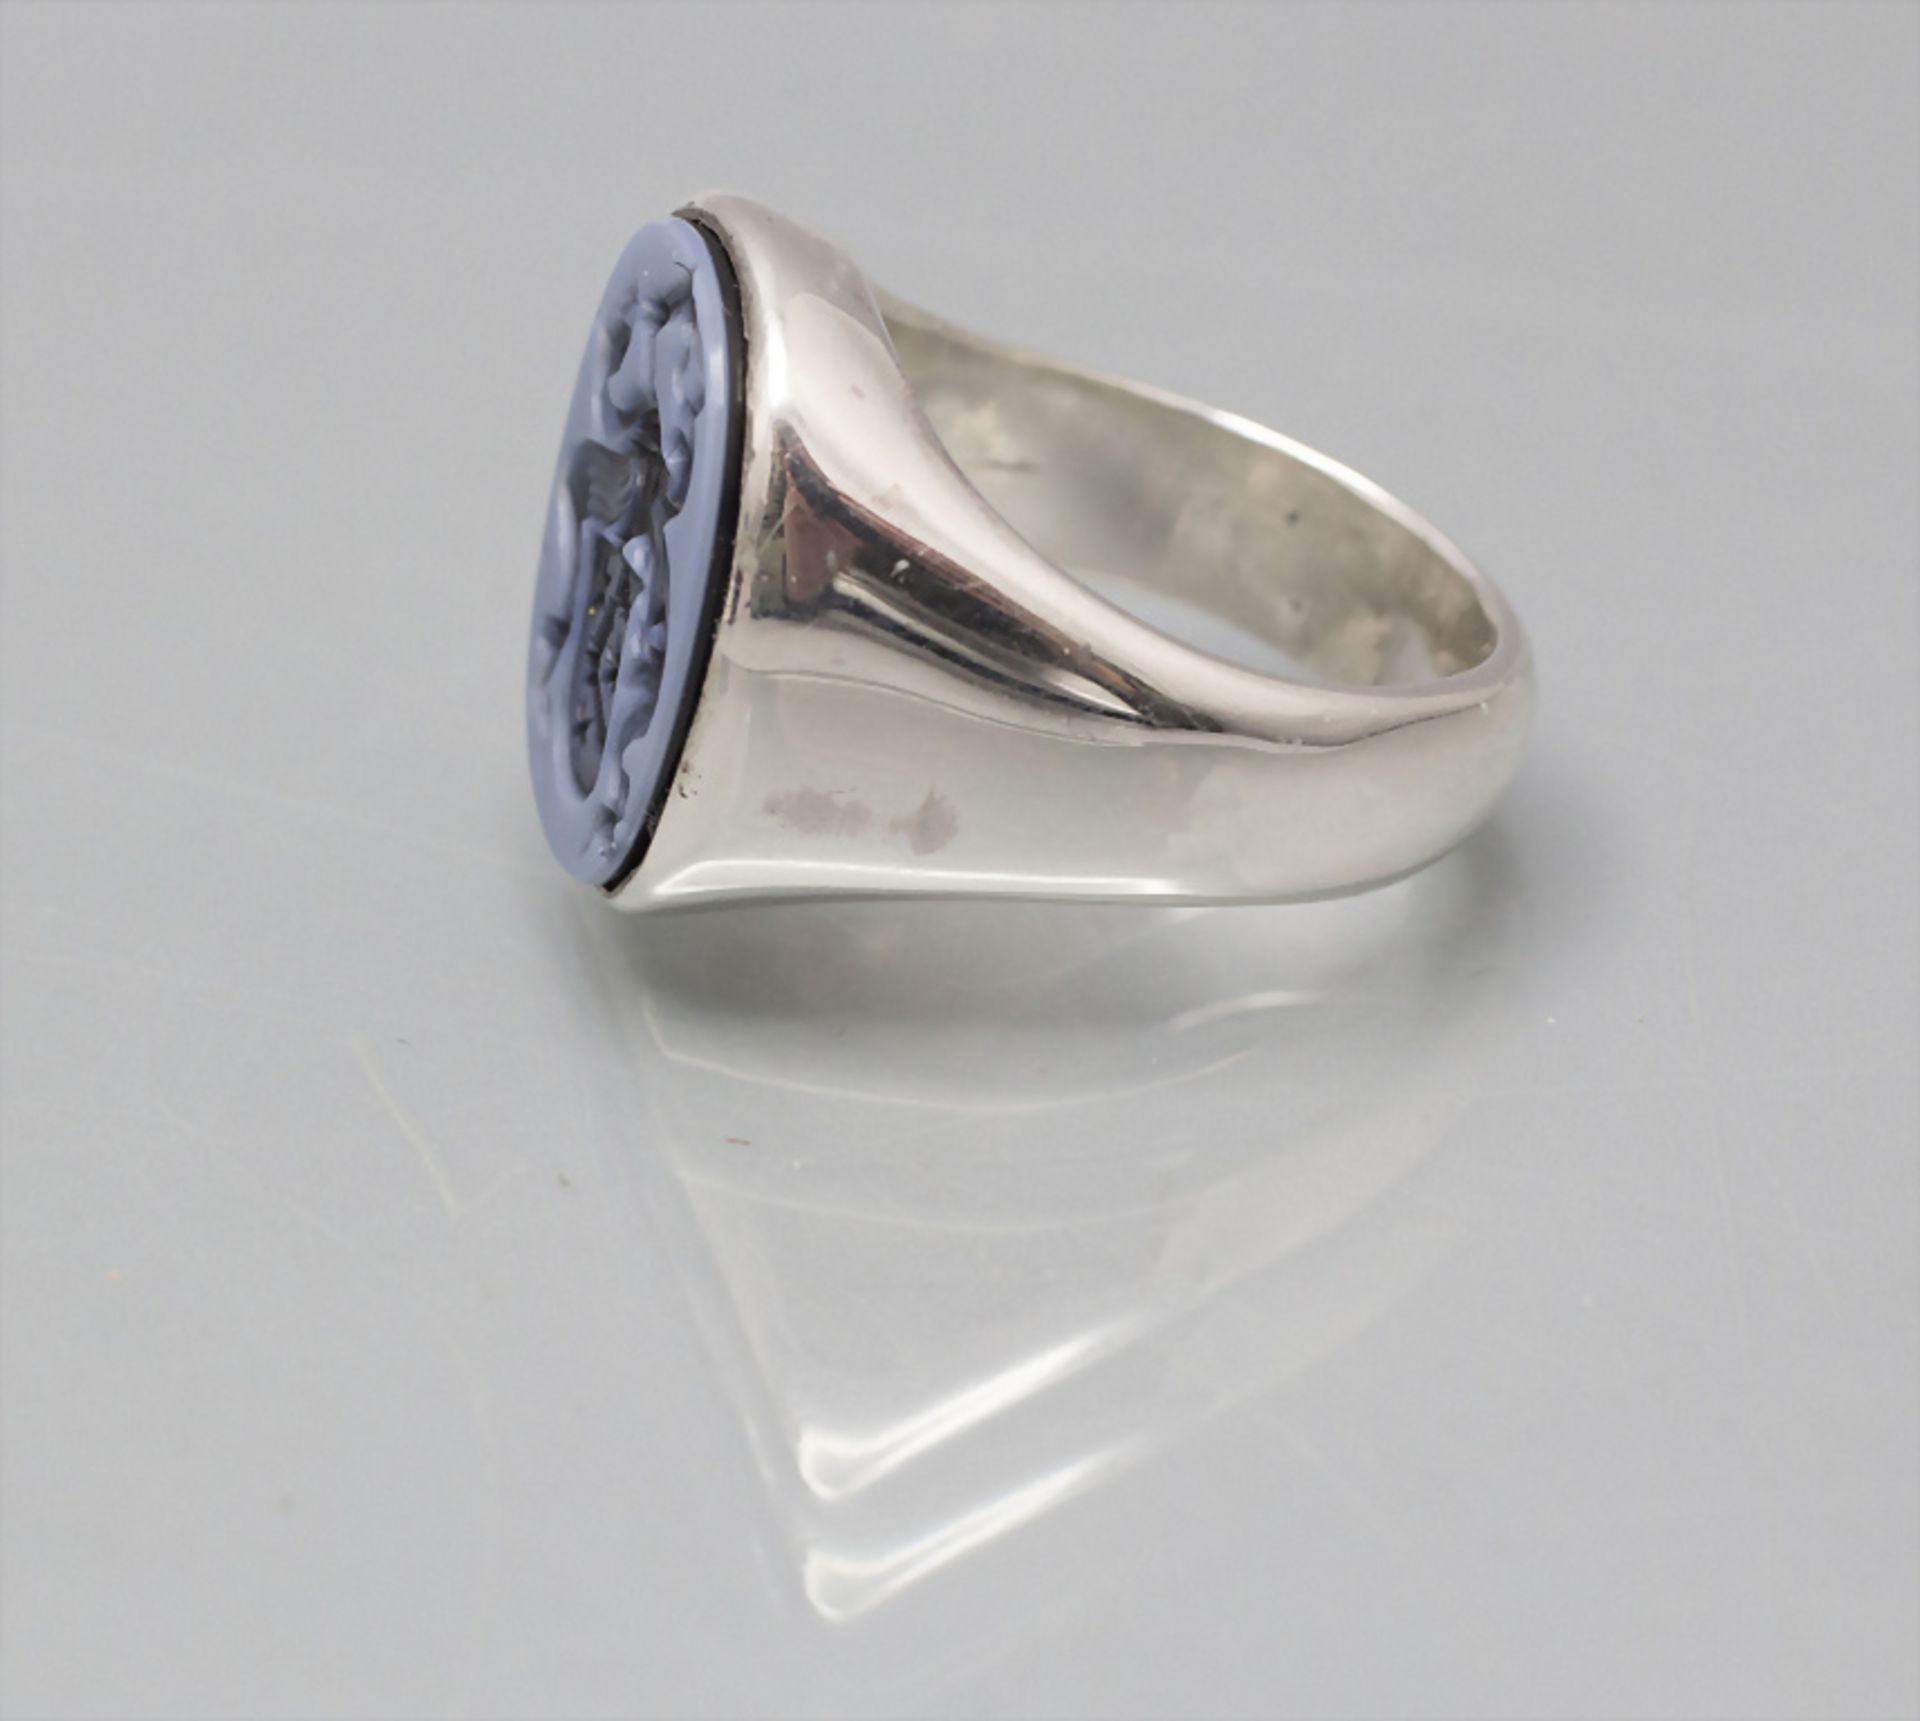 Siegelring / A silver seal ring, 20. Jh. - Image 3 of 4